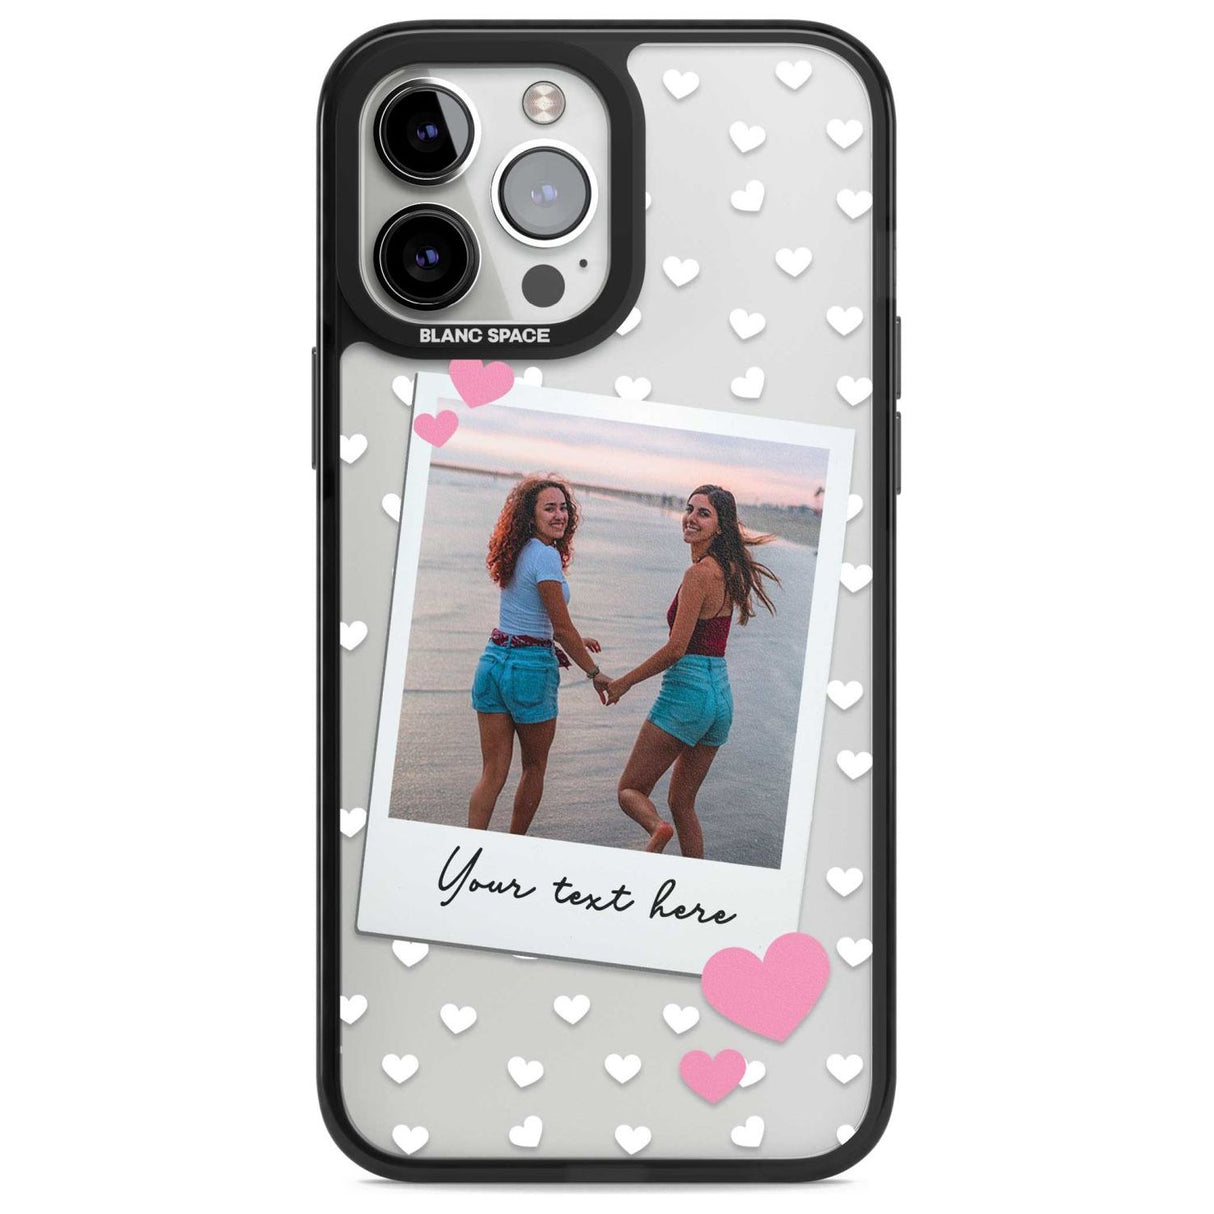 Personalised Instant Film & Hearts Photo Custom Phone Case iPhone 13 Pro Max / Magsafe Black Impact Case Blanc Space